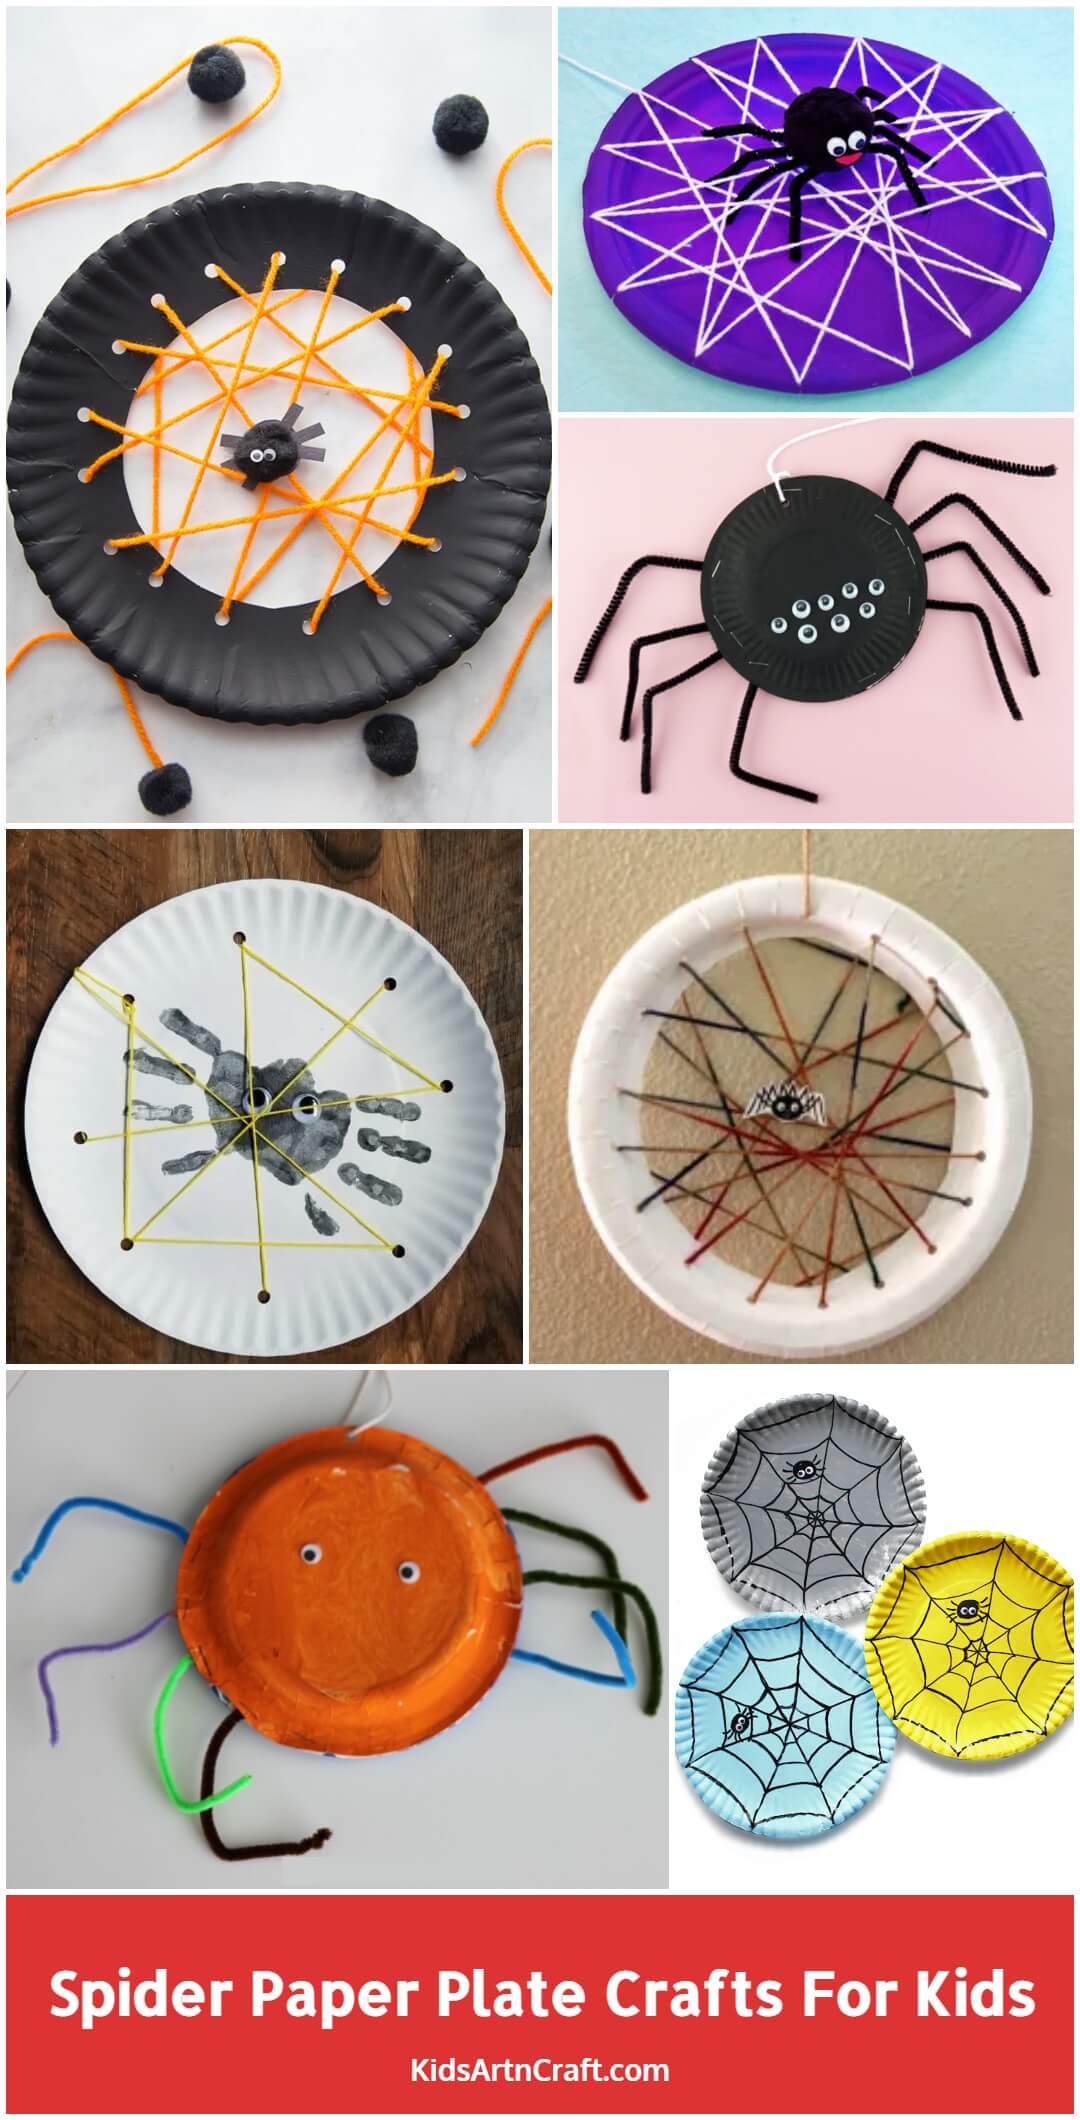 Spider Paper Plate Crafts for Kids